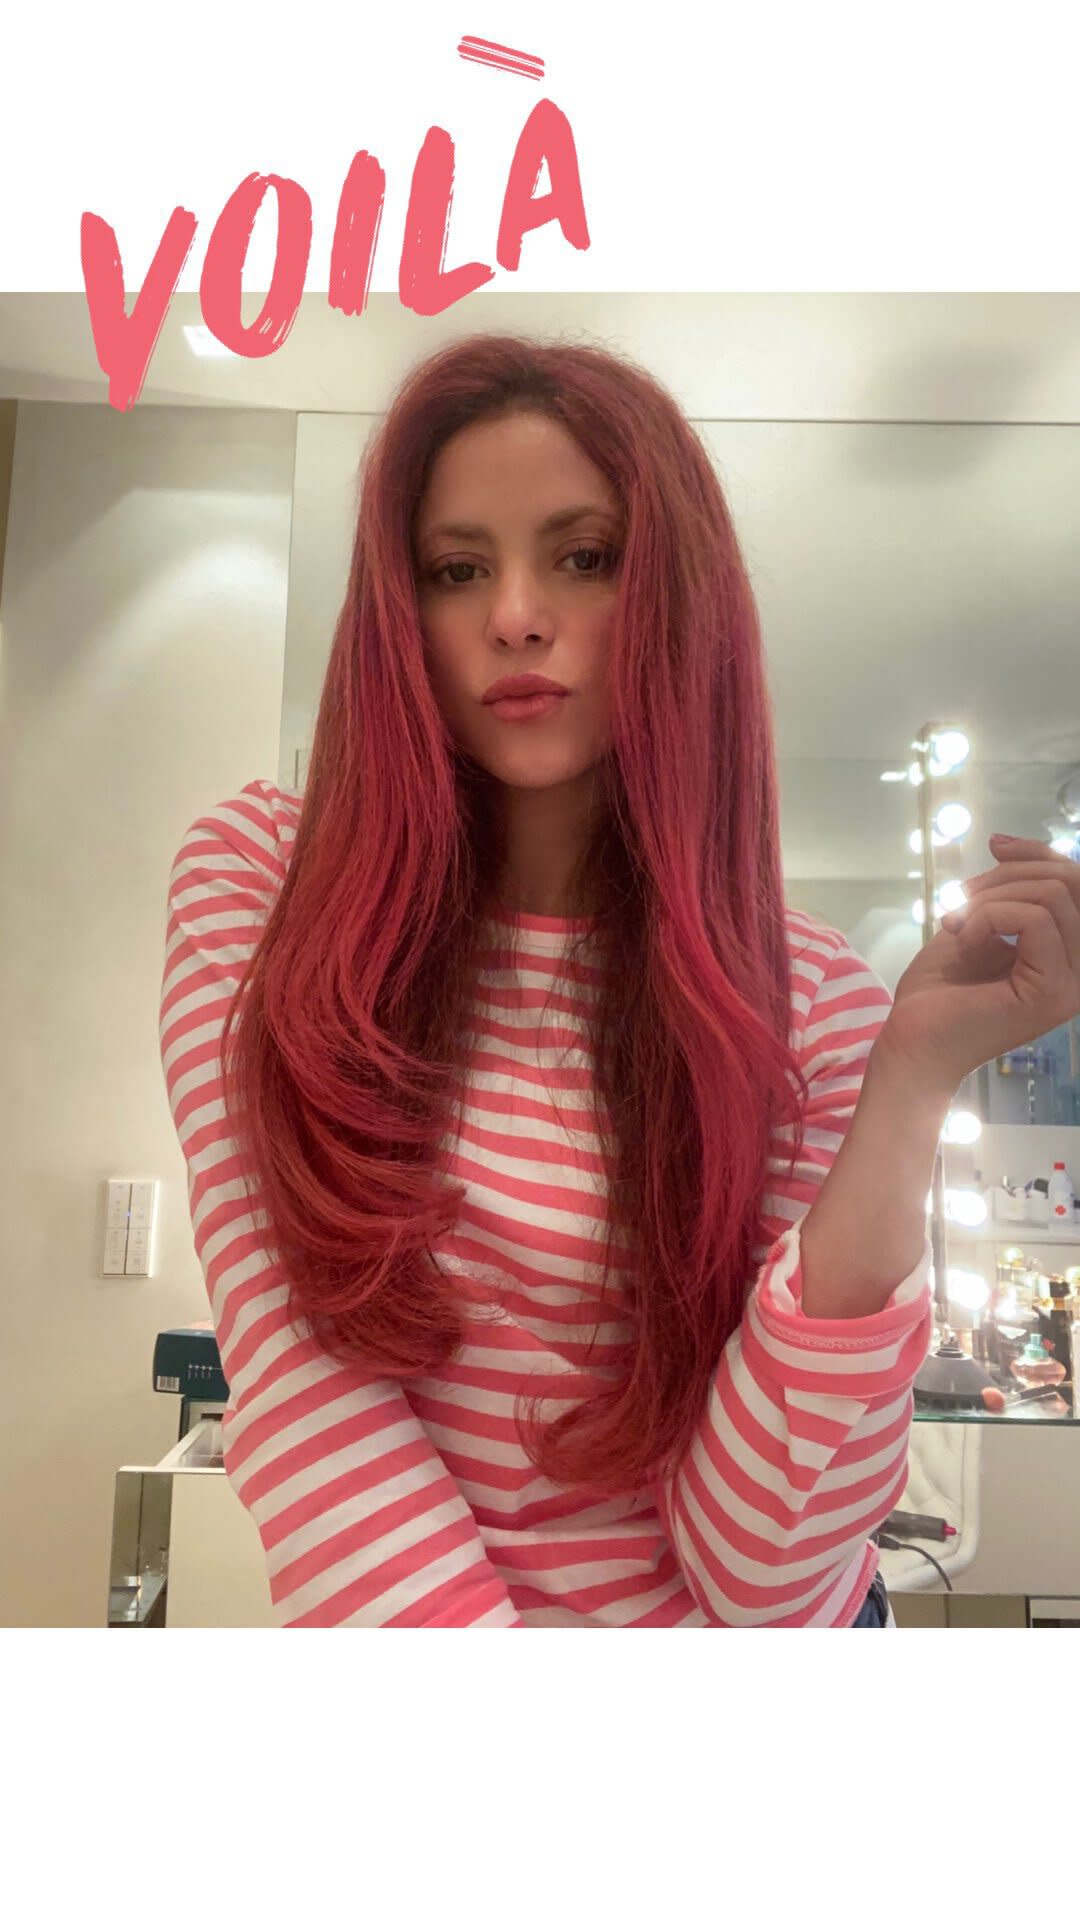 Shakira Dyes Hair A Fiery Red Giving Us Serious Flashbacks To Her Early 2000s Looks